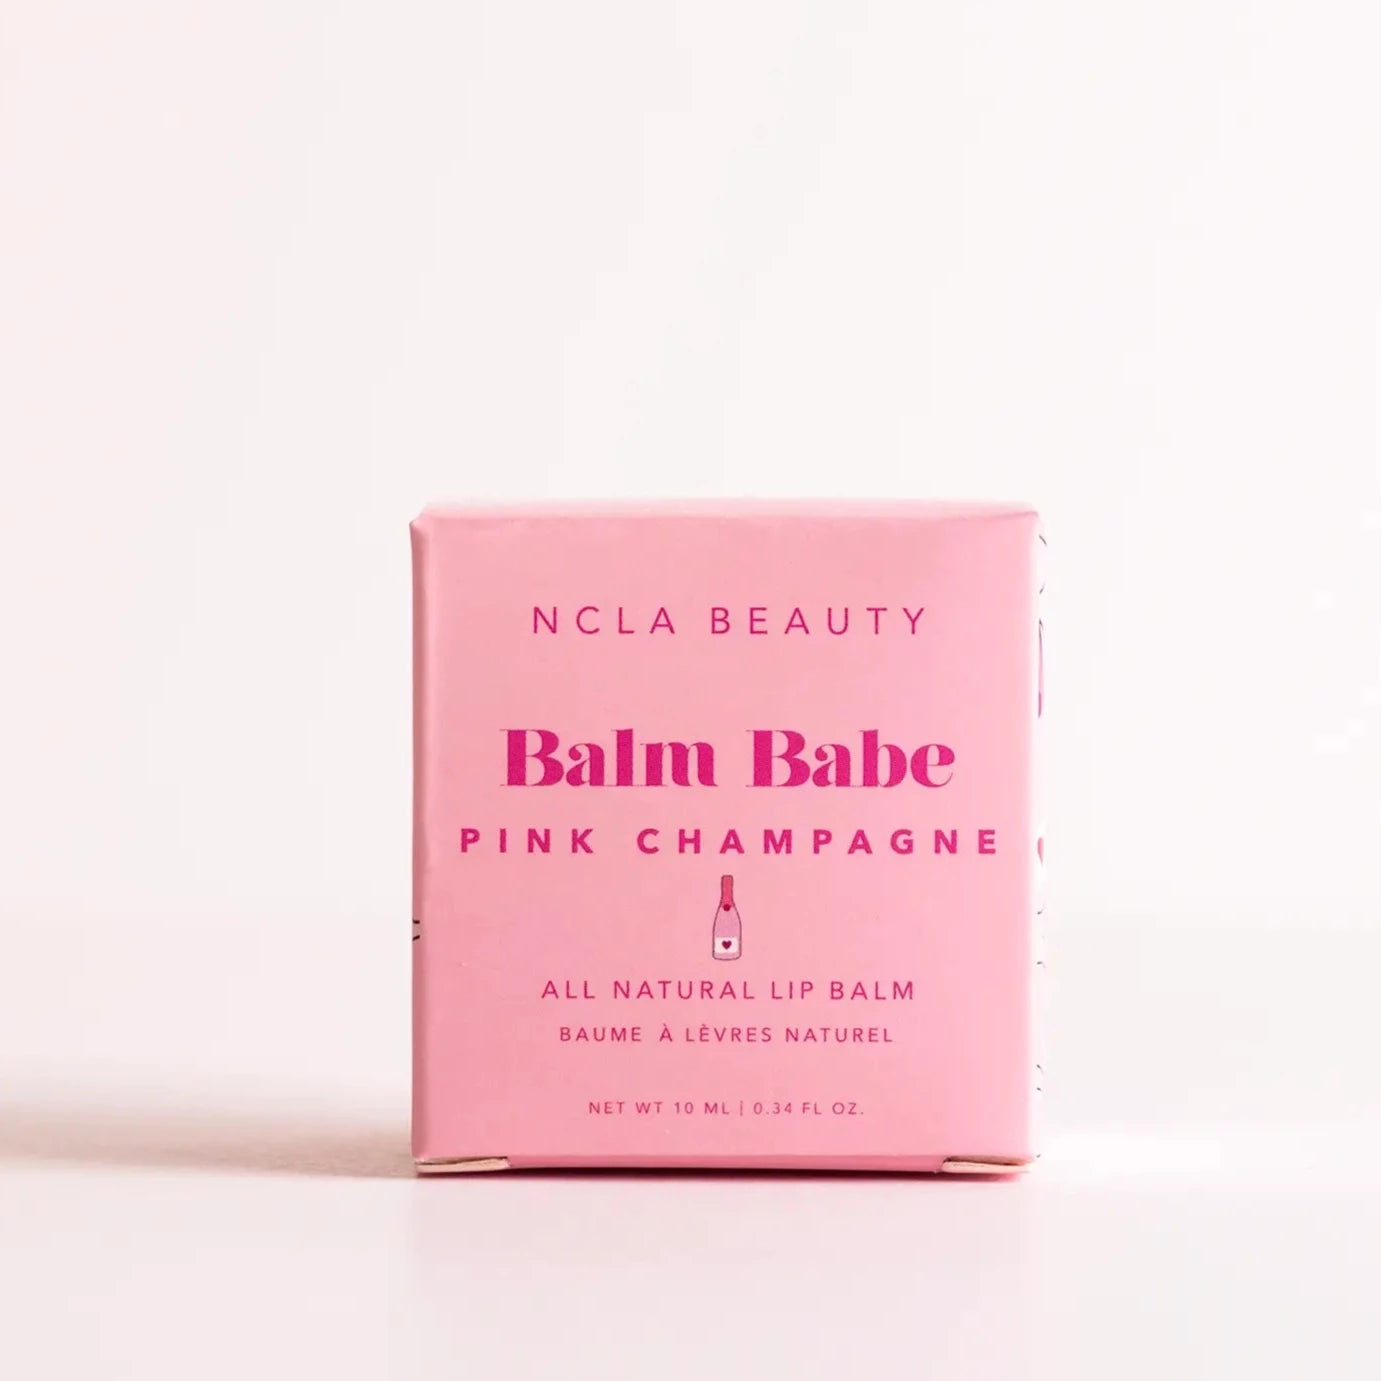 packaging for the balm babe pink champagne all natural lip balm. pink cube box with pink text